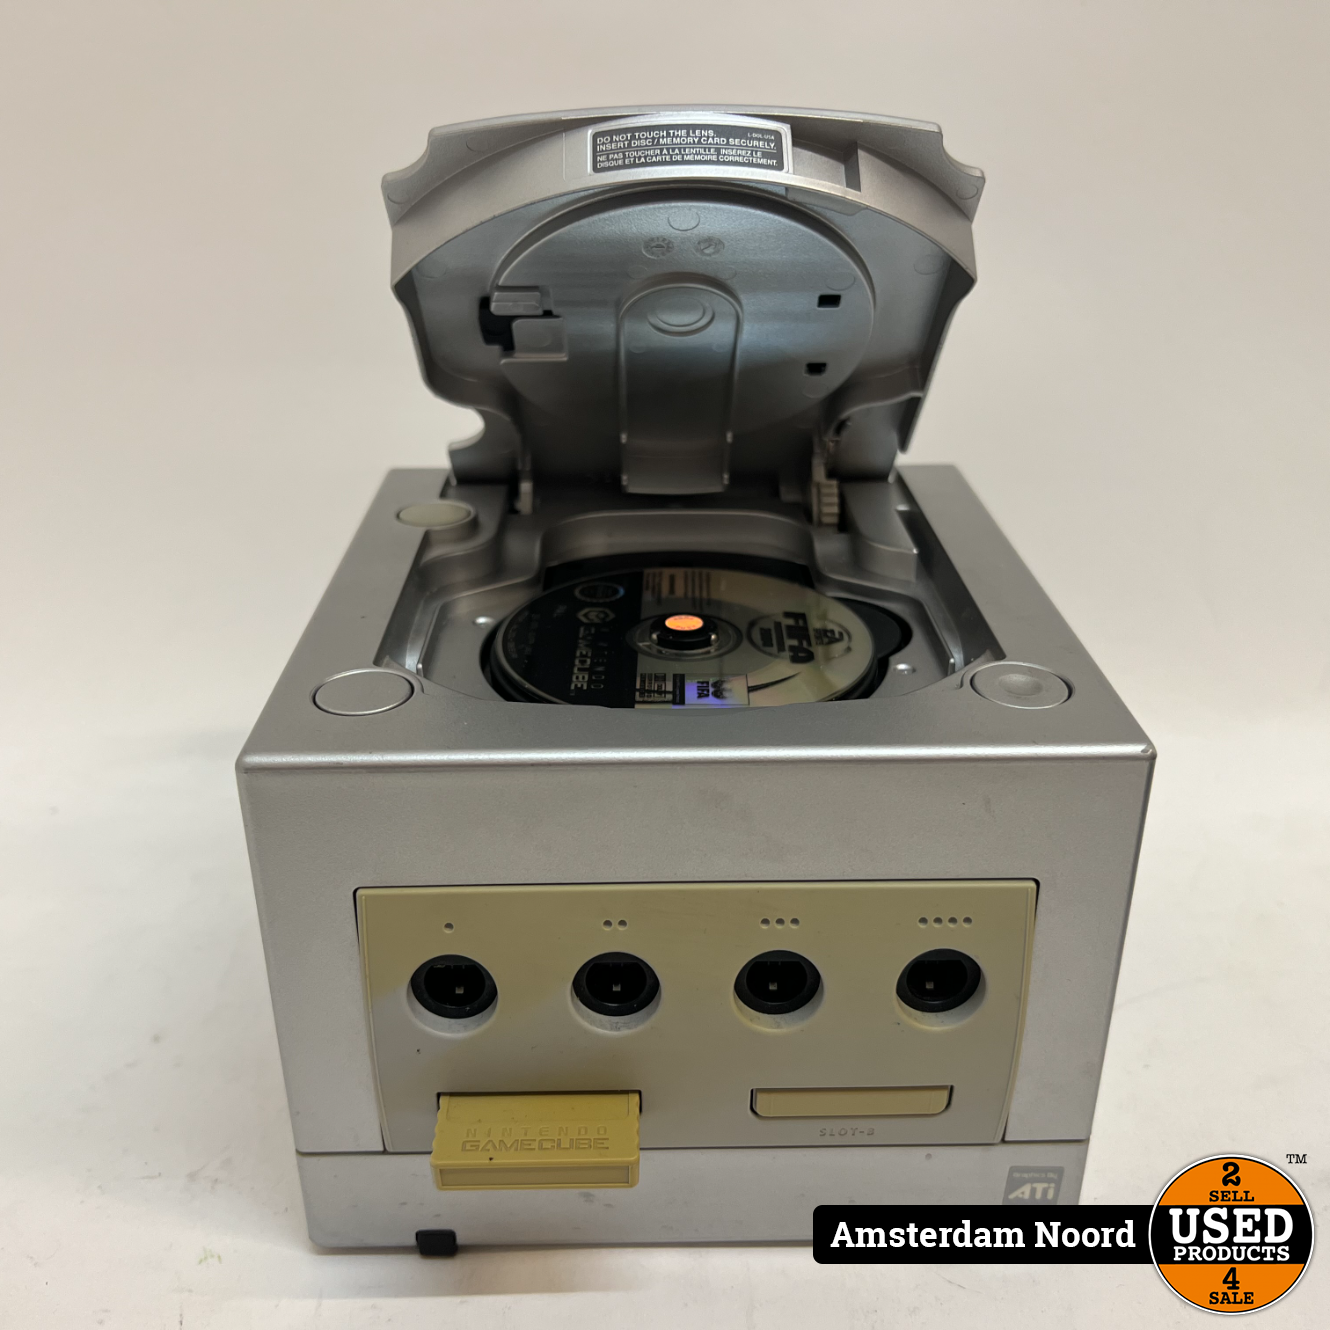 Nintendo Zilver - Used Products Amsterdam